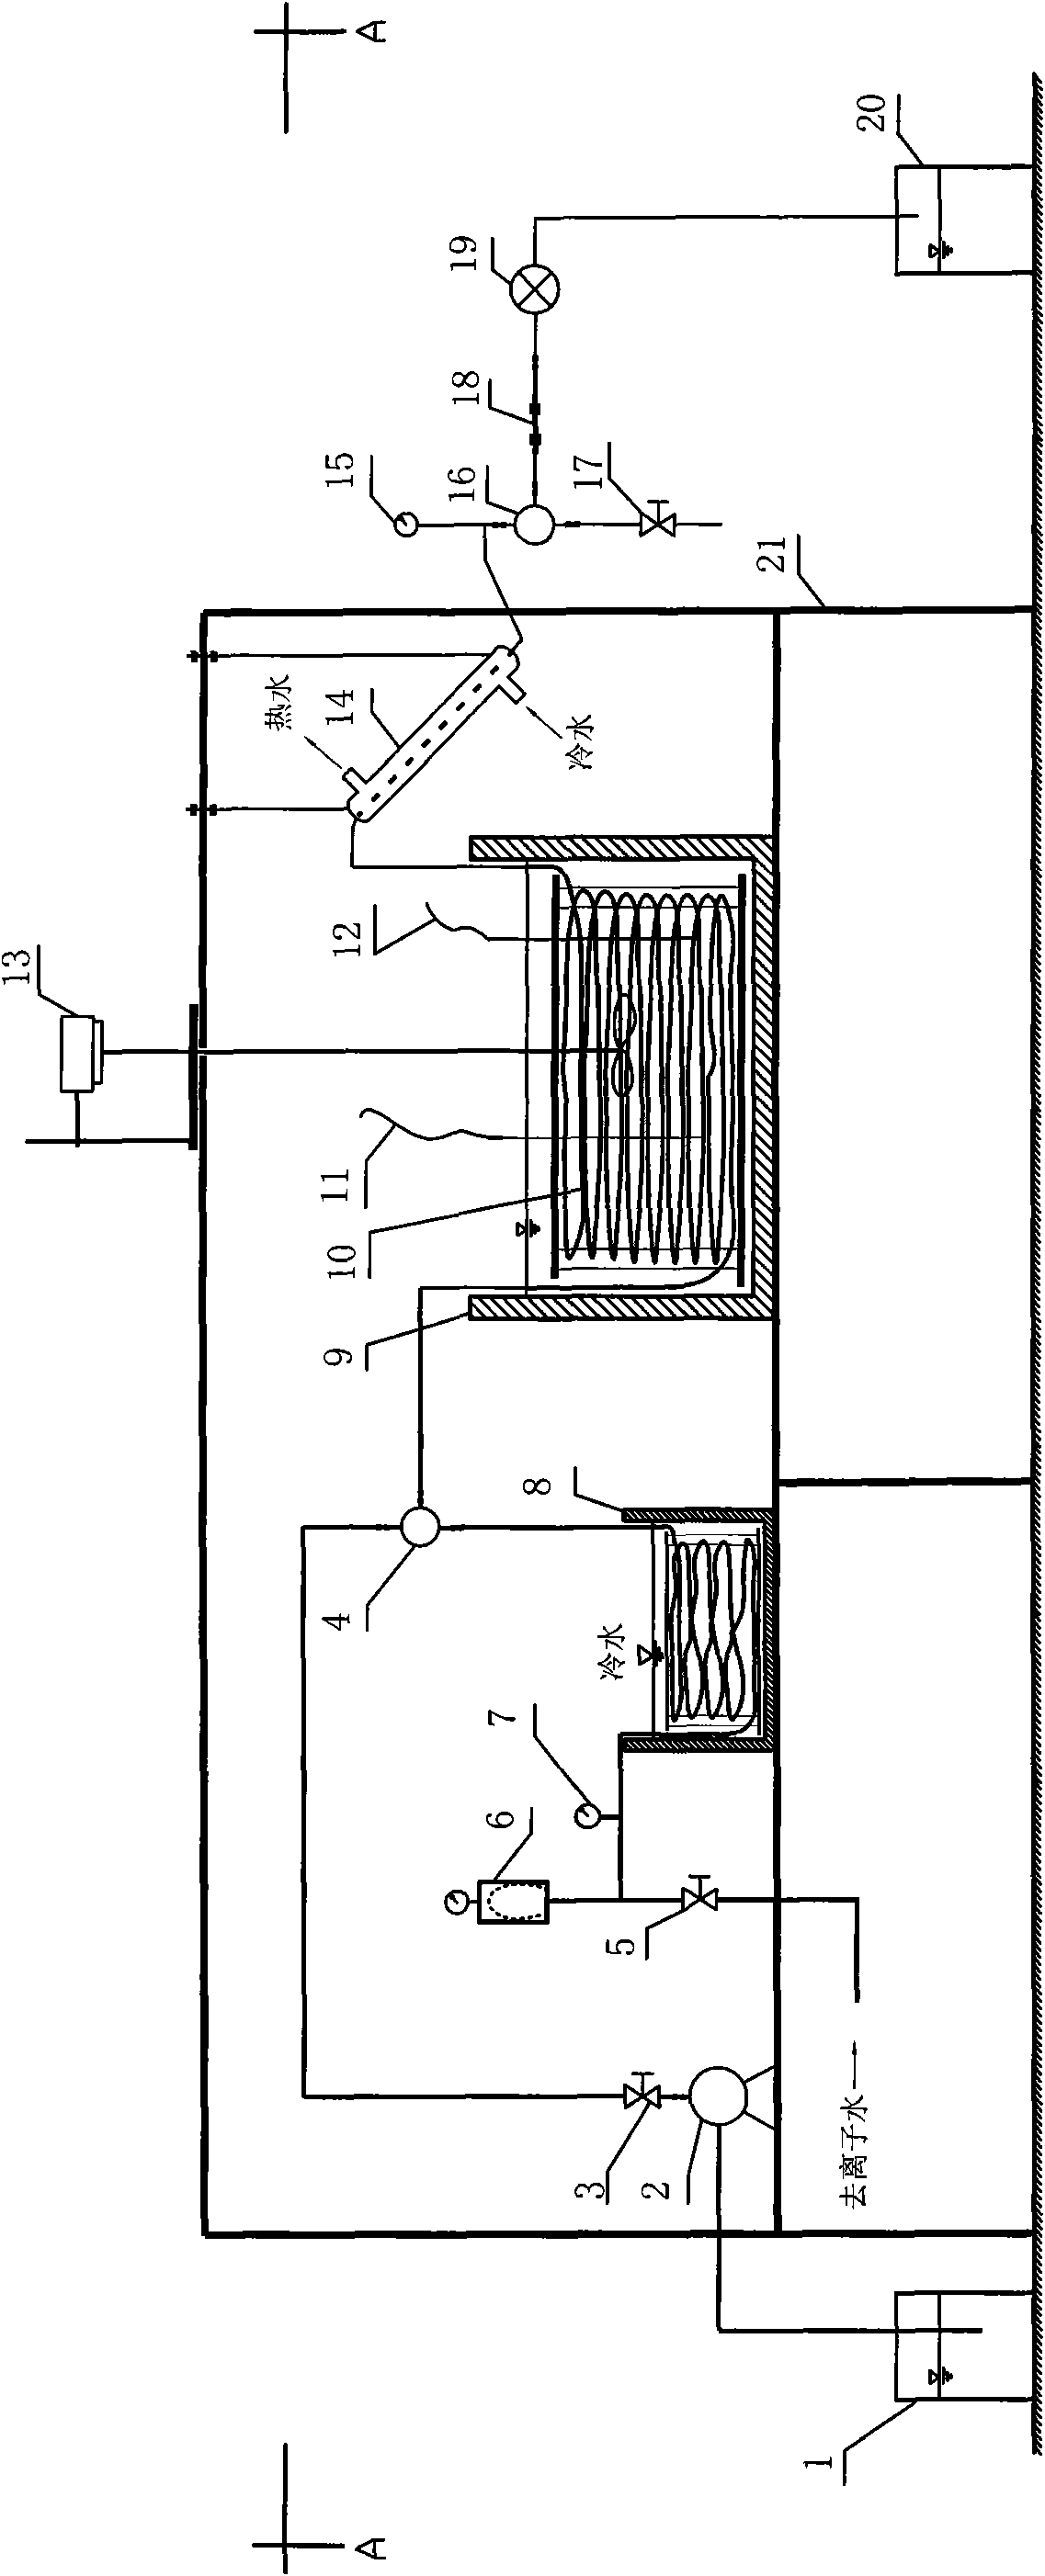 Device for continuously converting glycerine into lactic acid by using hydrothermal reaction